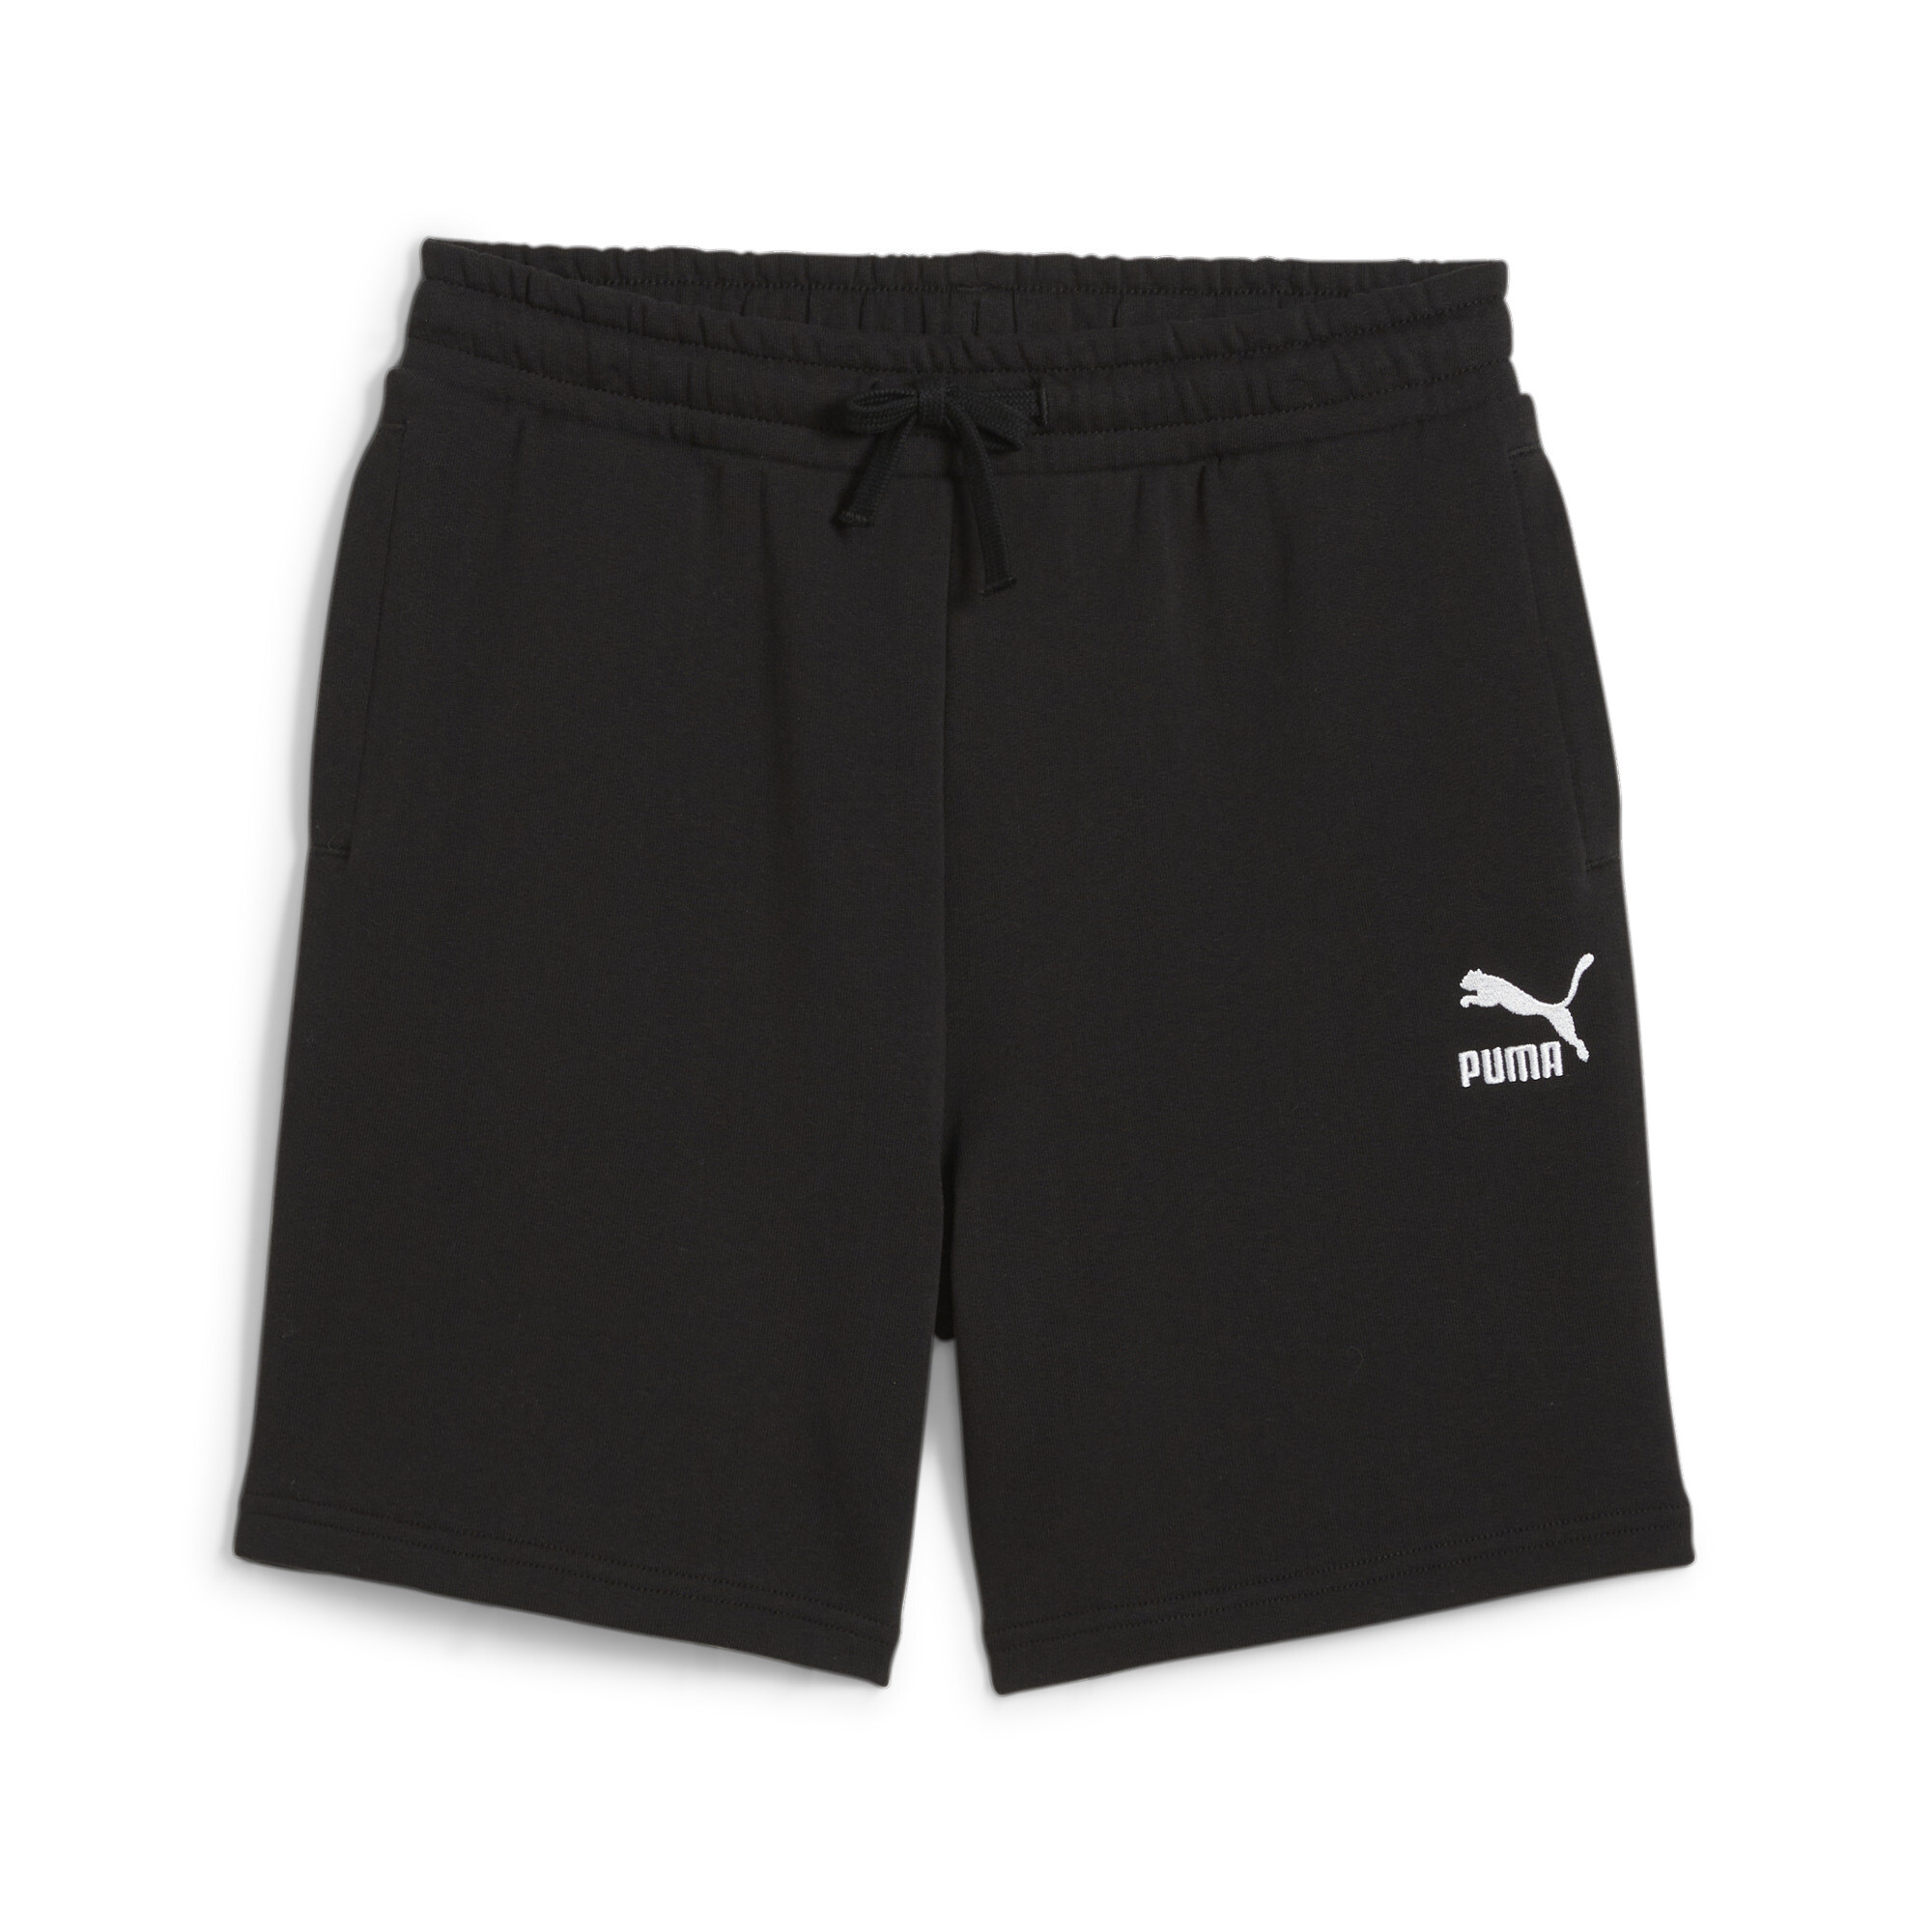 PUMA BETTER CLASSICS Shorts In Black, Size 9-10 Youth